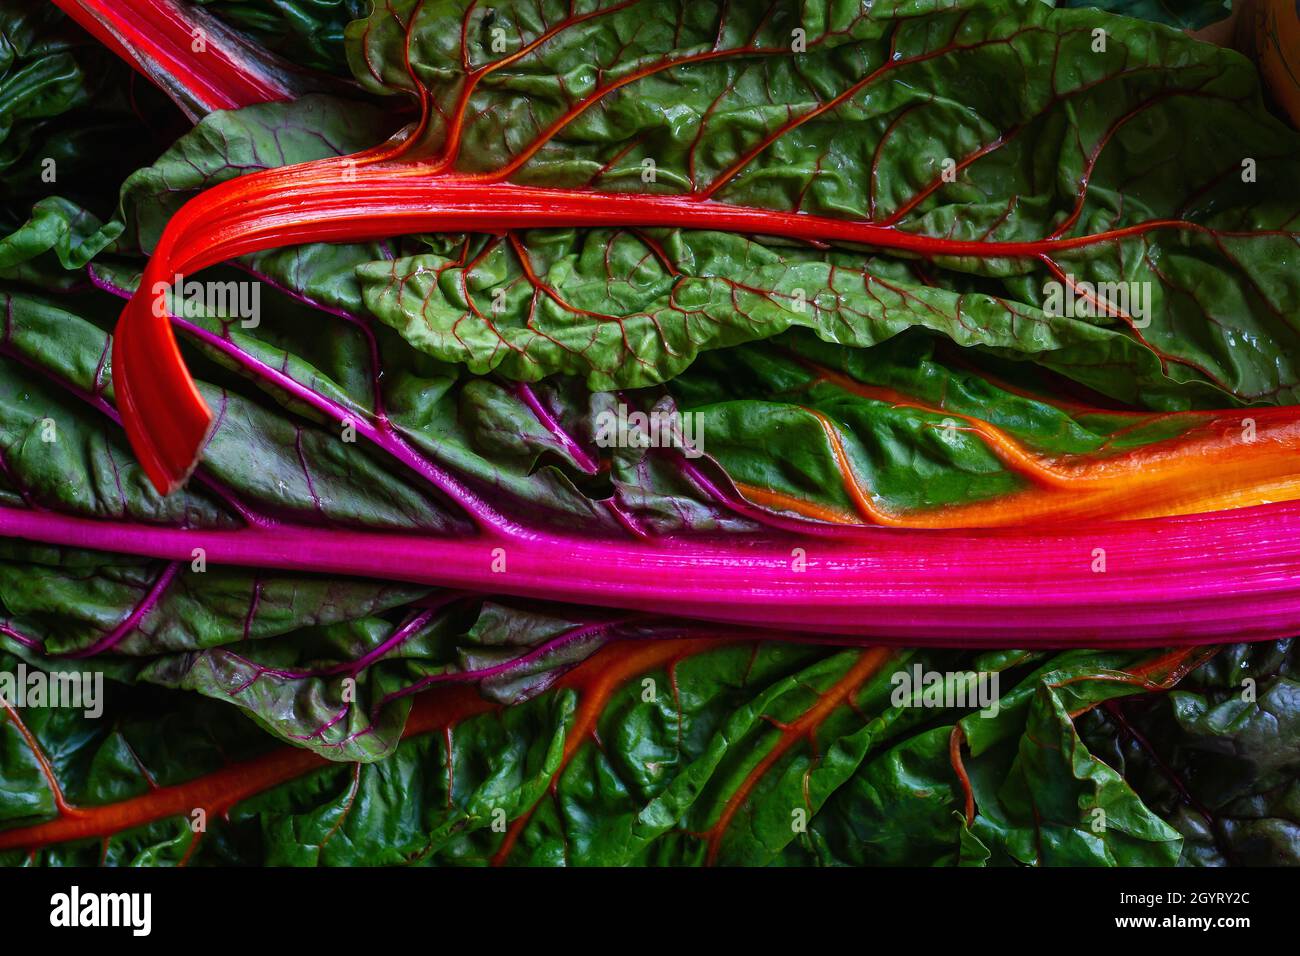 Colorful leaf beet raimbow swiss chards red-stemmed edible leaves Stock Photo